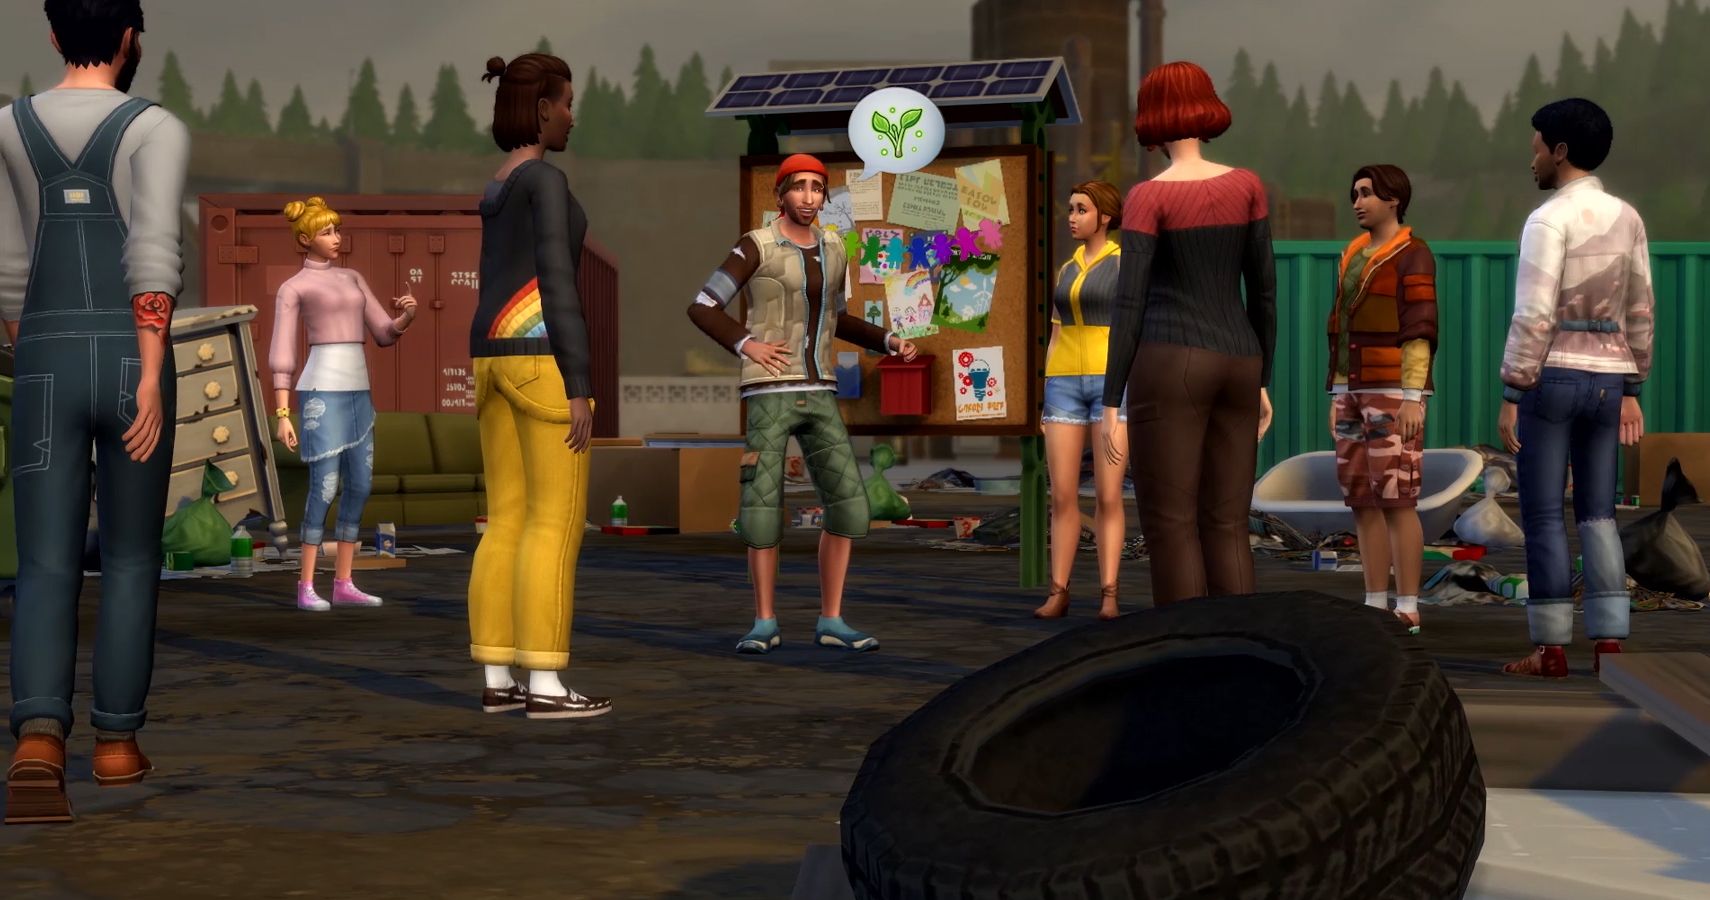 This Week The Sims 4: Eco Lifestyle Has Brought Some Unexpected Surprises